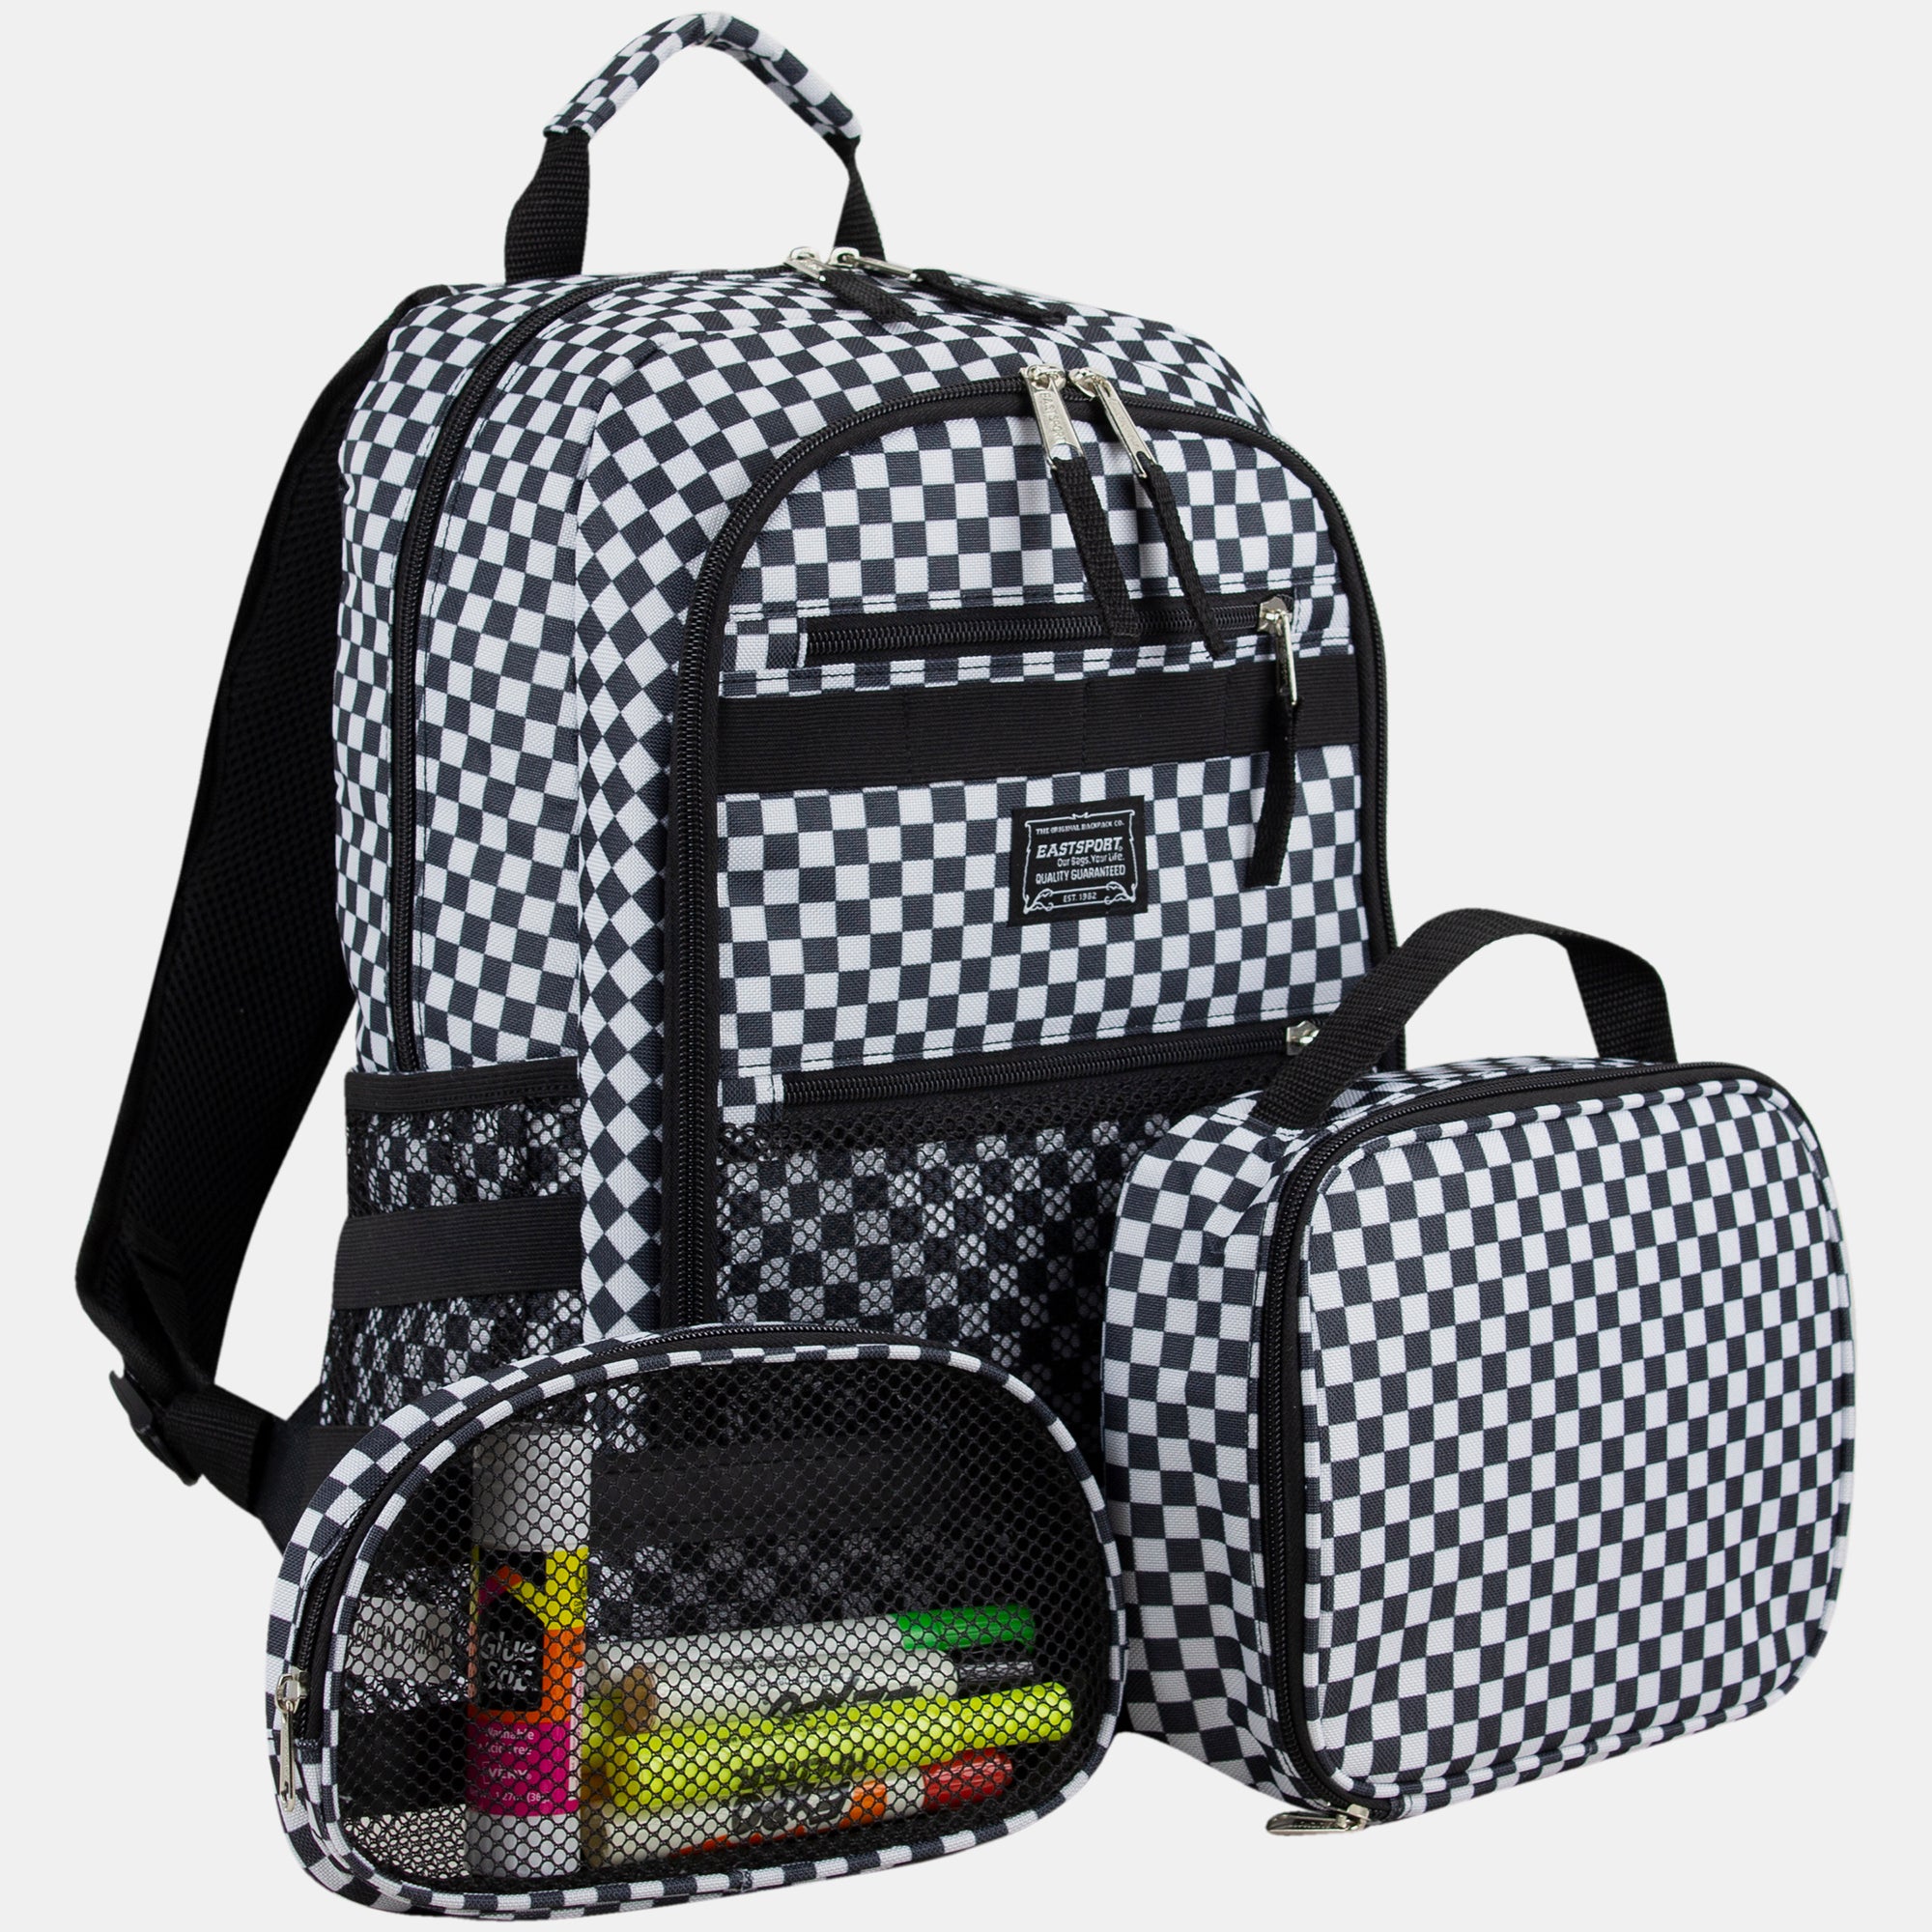 Backpack and Lunchbox Set